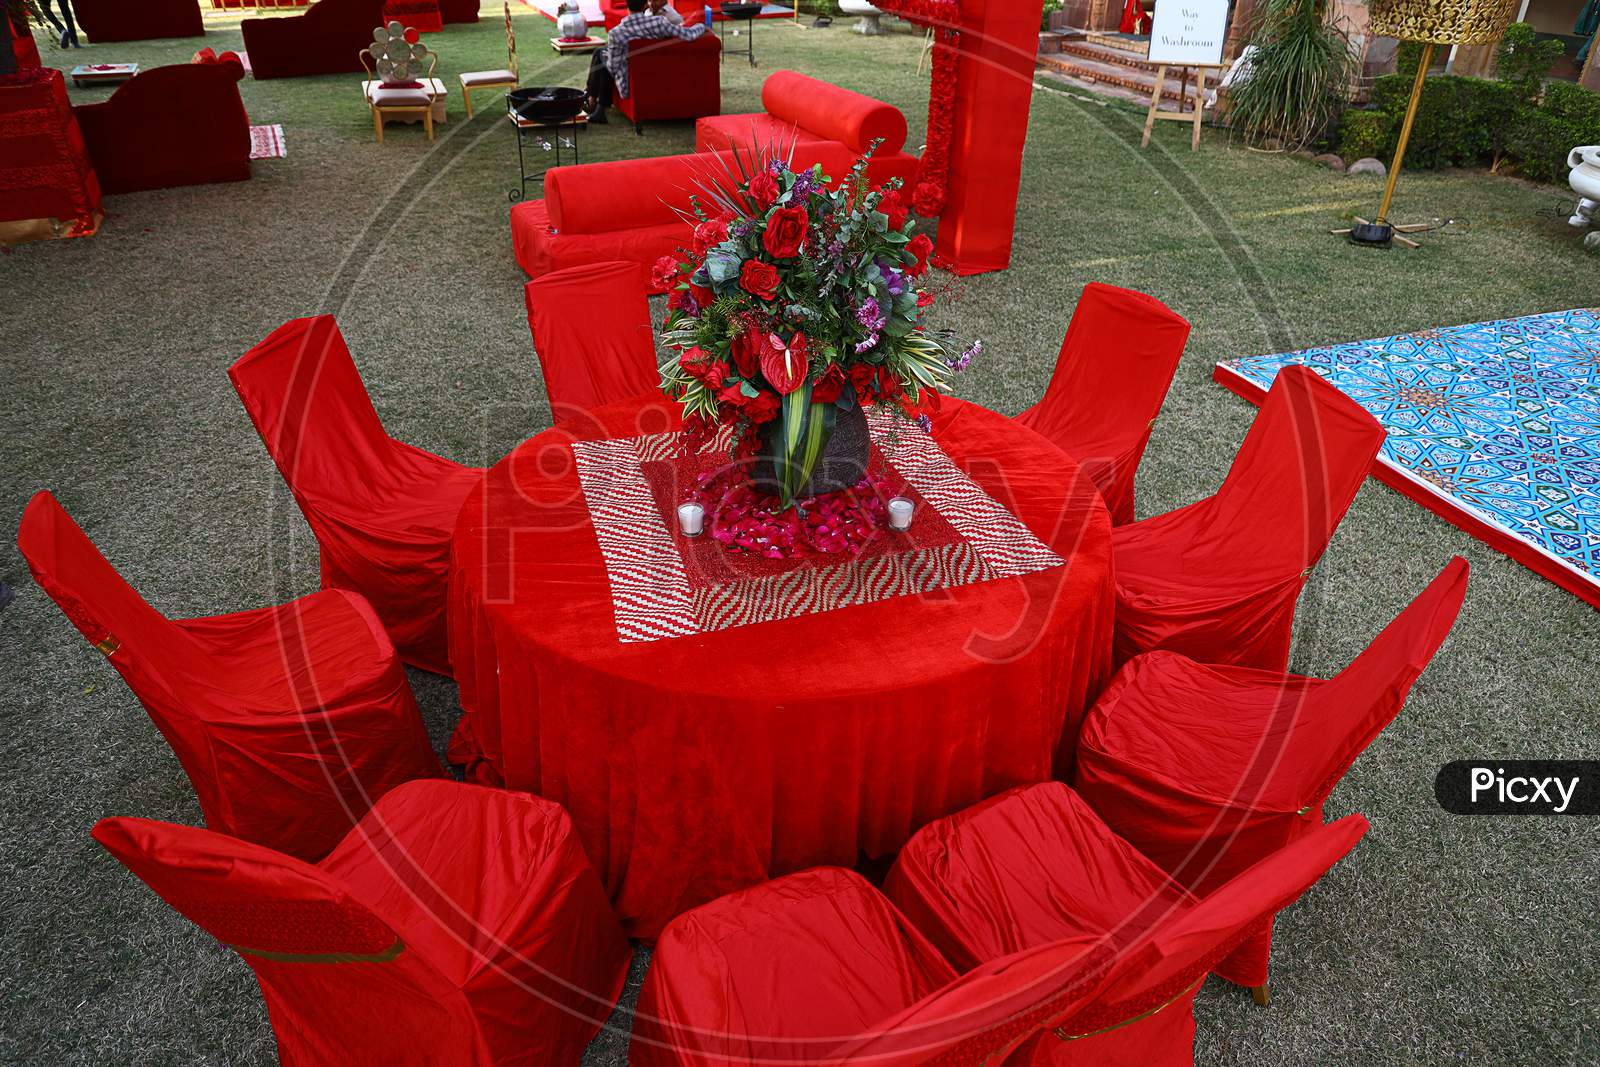 Organized Red Table And Chairs Decorated With Flower Centerpiece, Luxury Sitting Arrangement Ready For The Guests On A Grassland Or Backyard